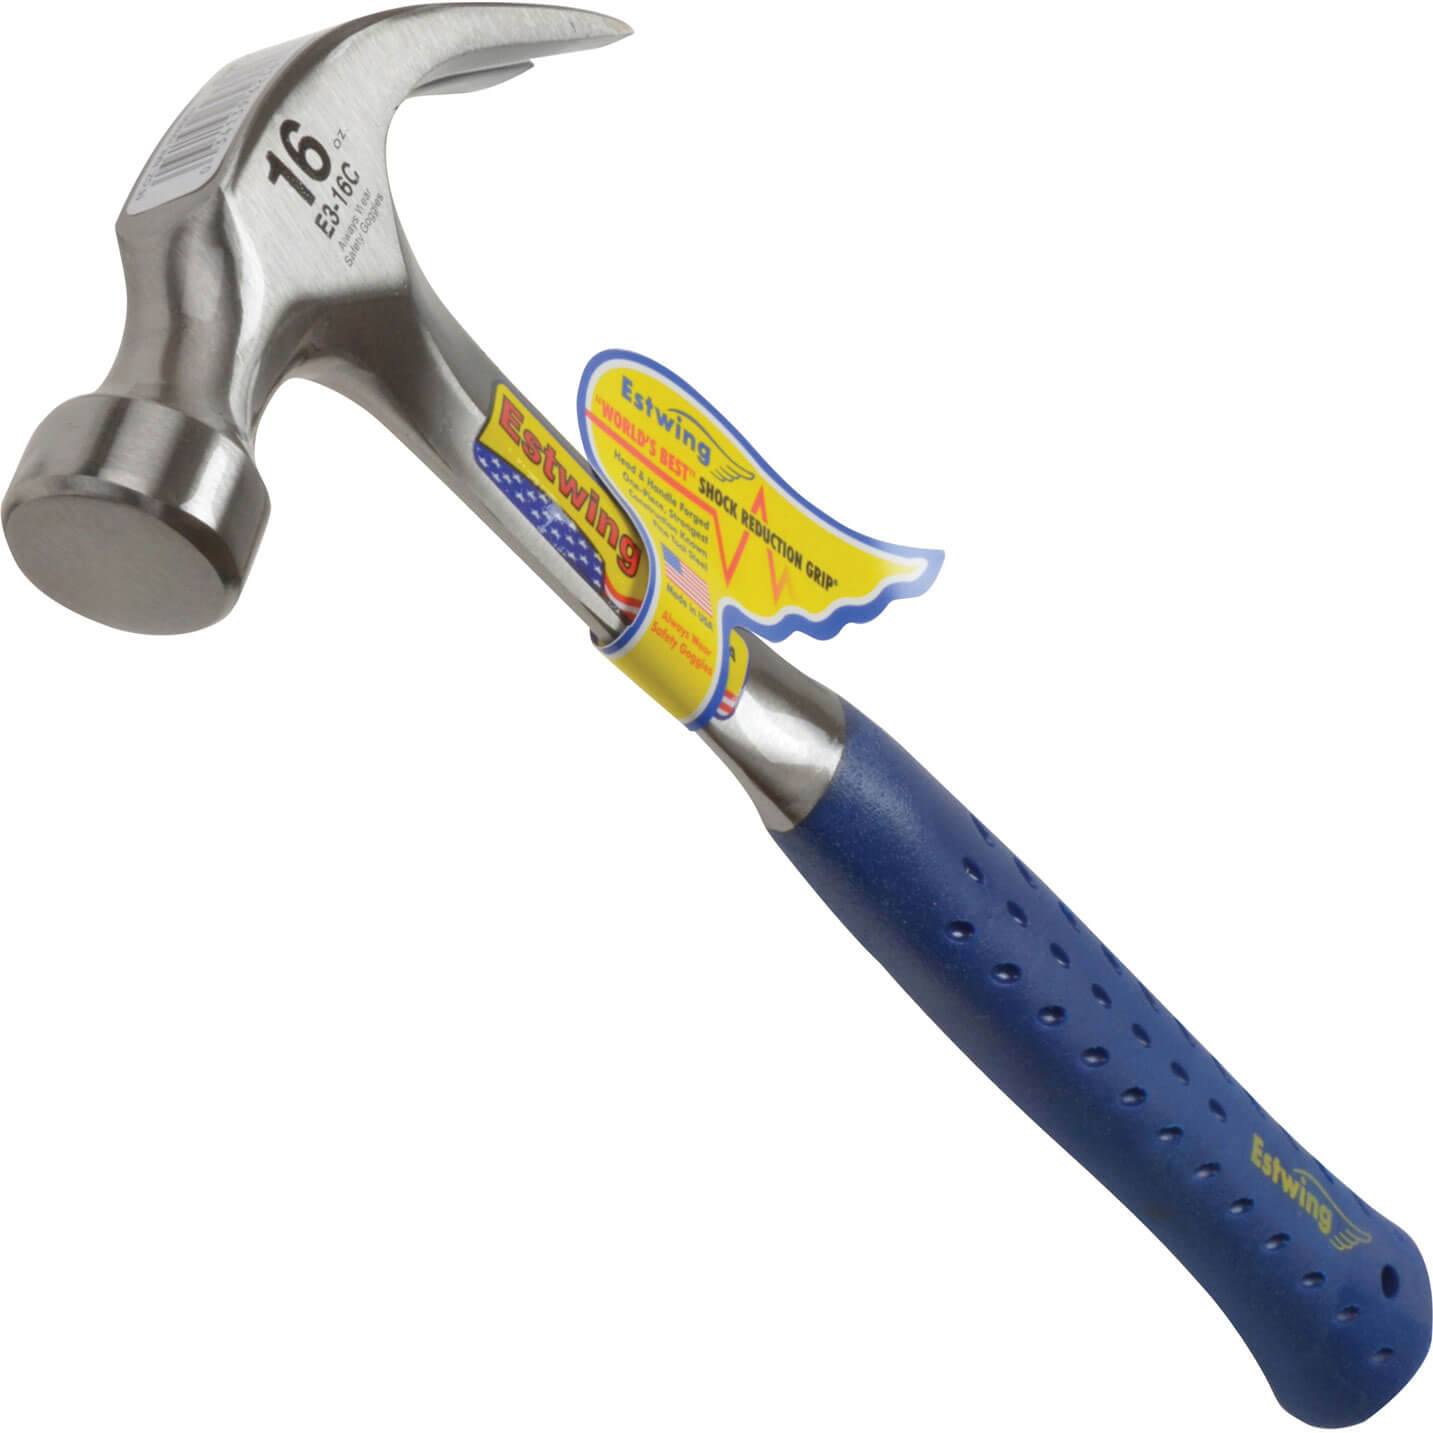 Estwing Curved Claw Hammer 450g